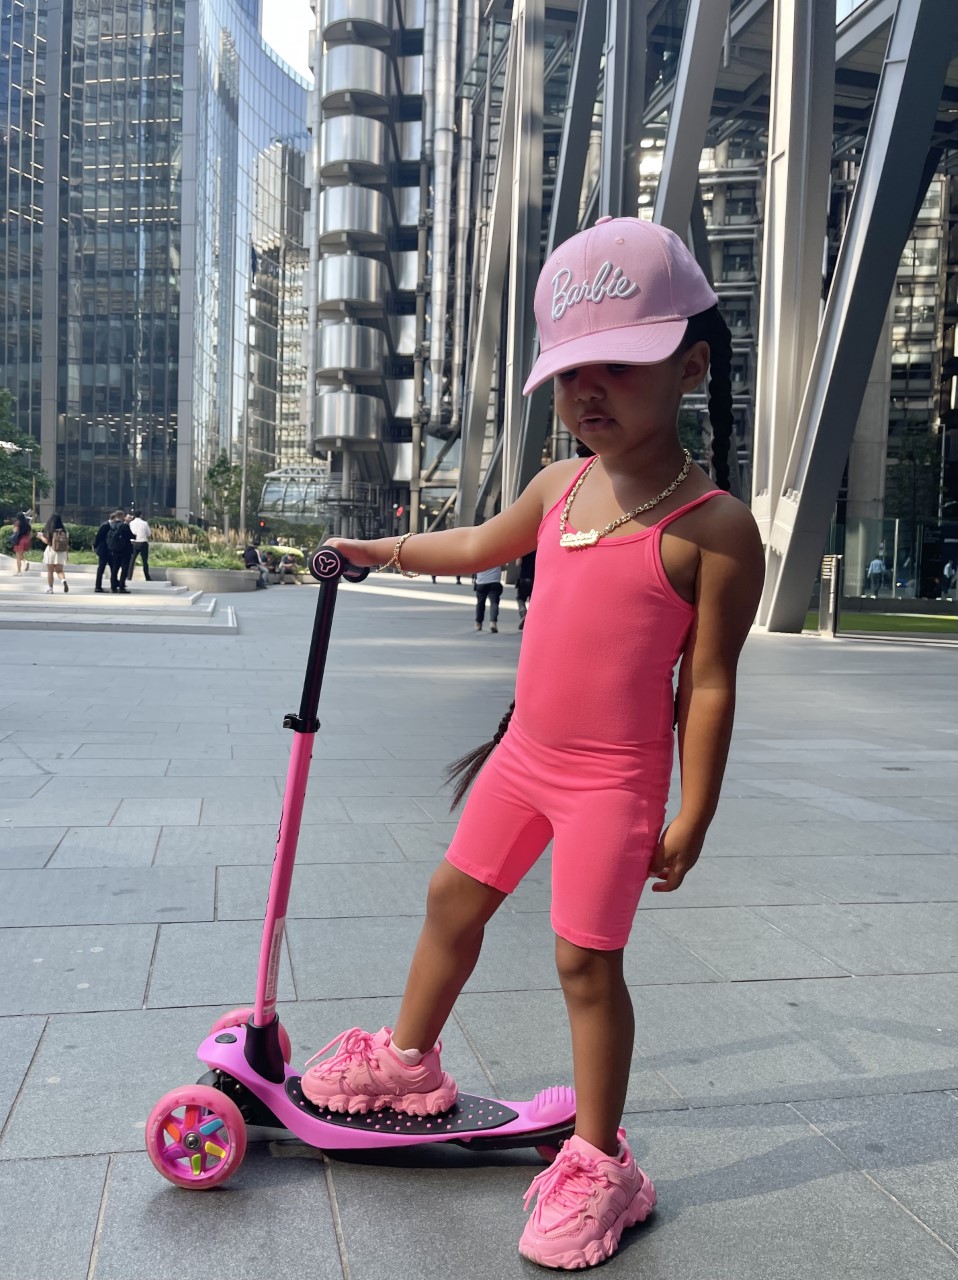 Lynnie is in the city of London with her scooter. Wearing a FashionNova pink onesie and pink sport shoes. She looks simply super cool.